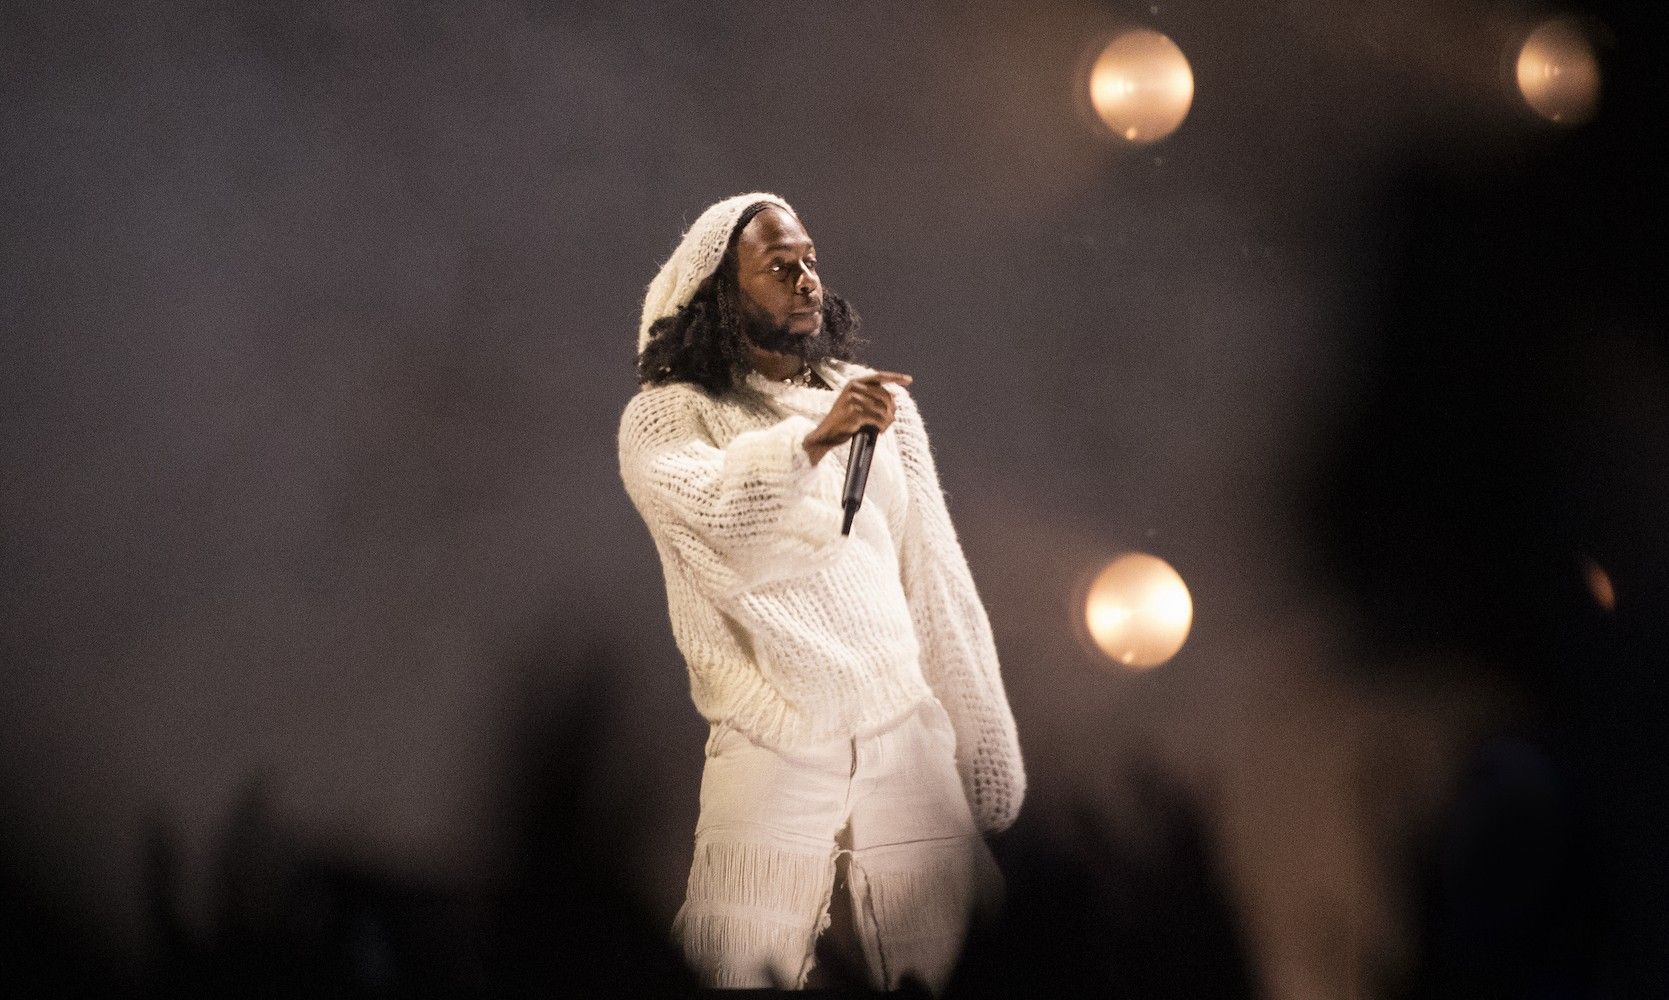 Kendrick Lamar is coming to Philly. Here are three standout songs from his  great new album.